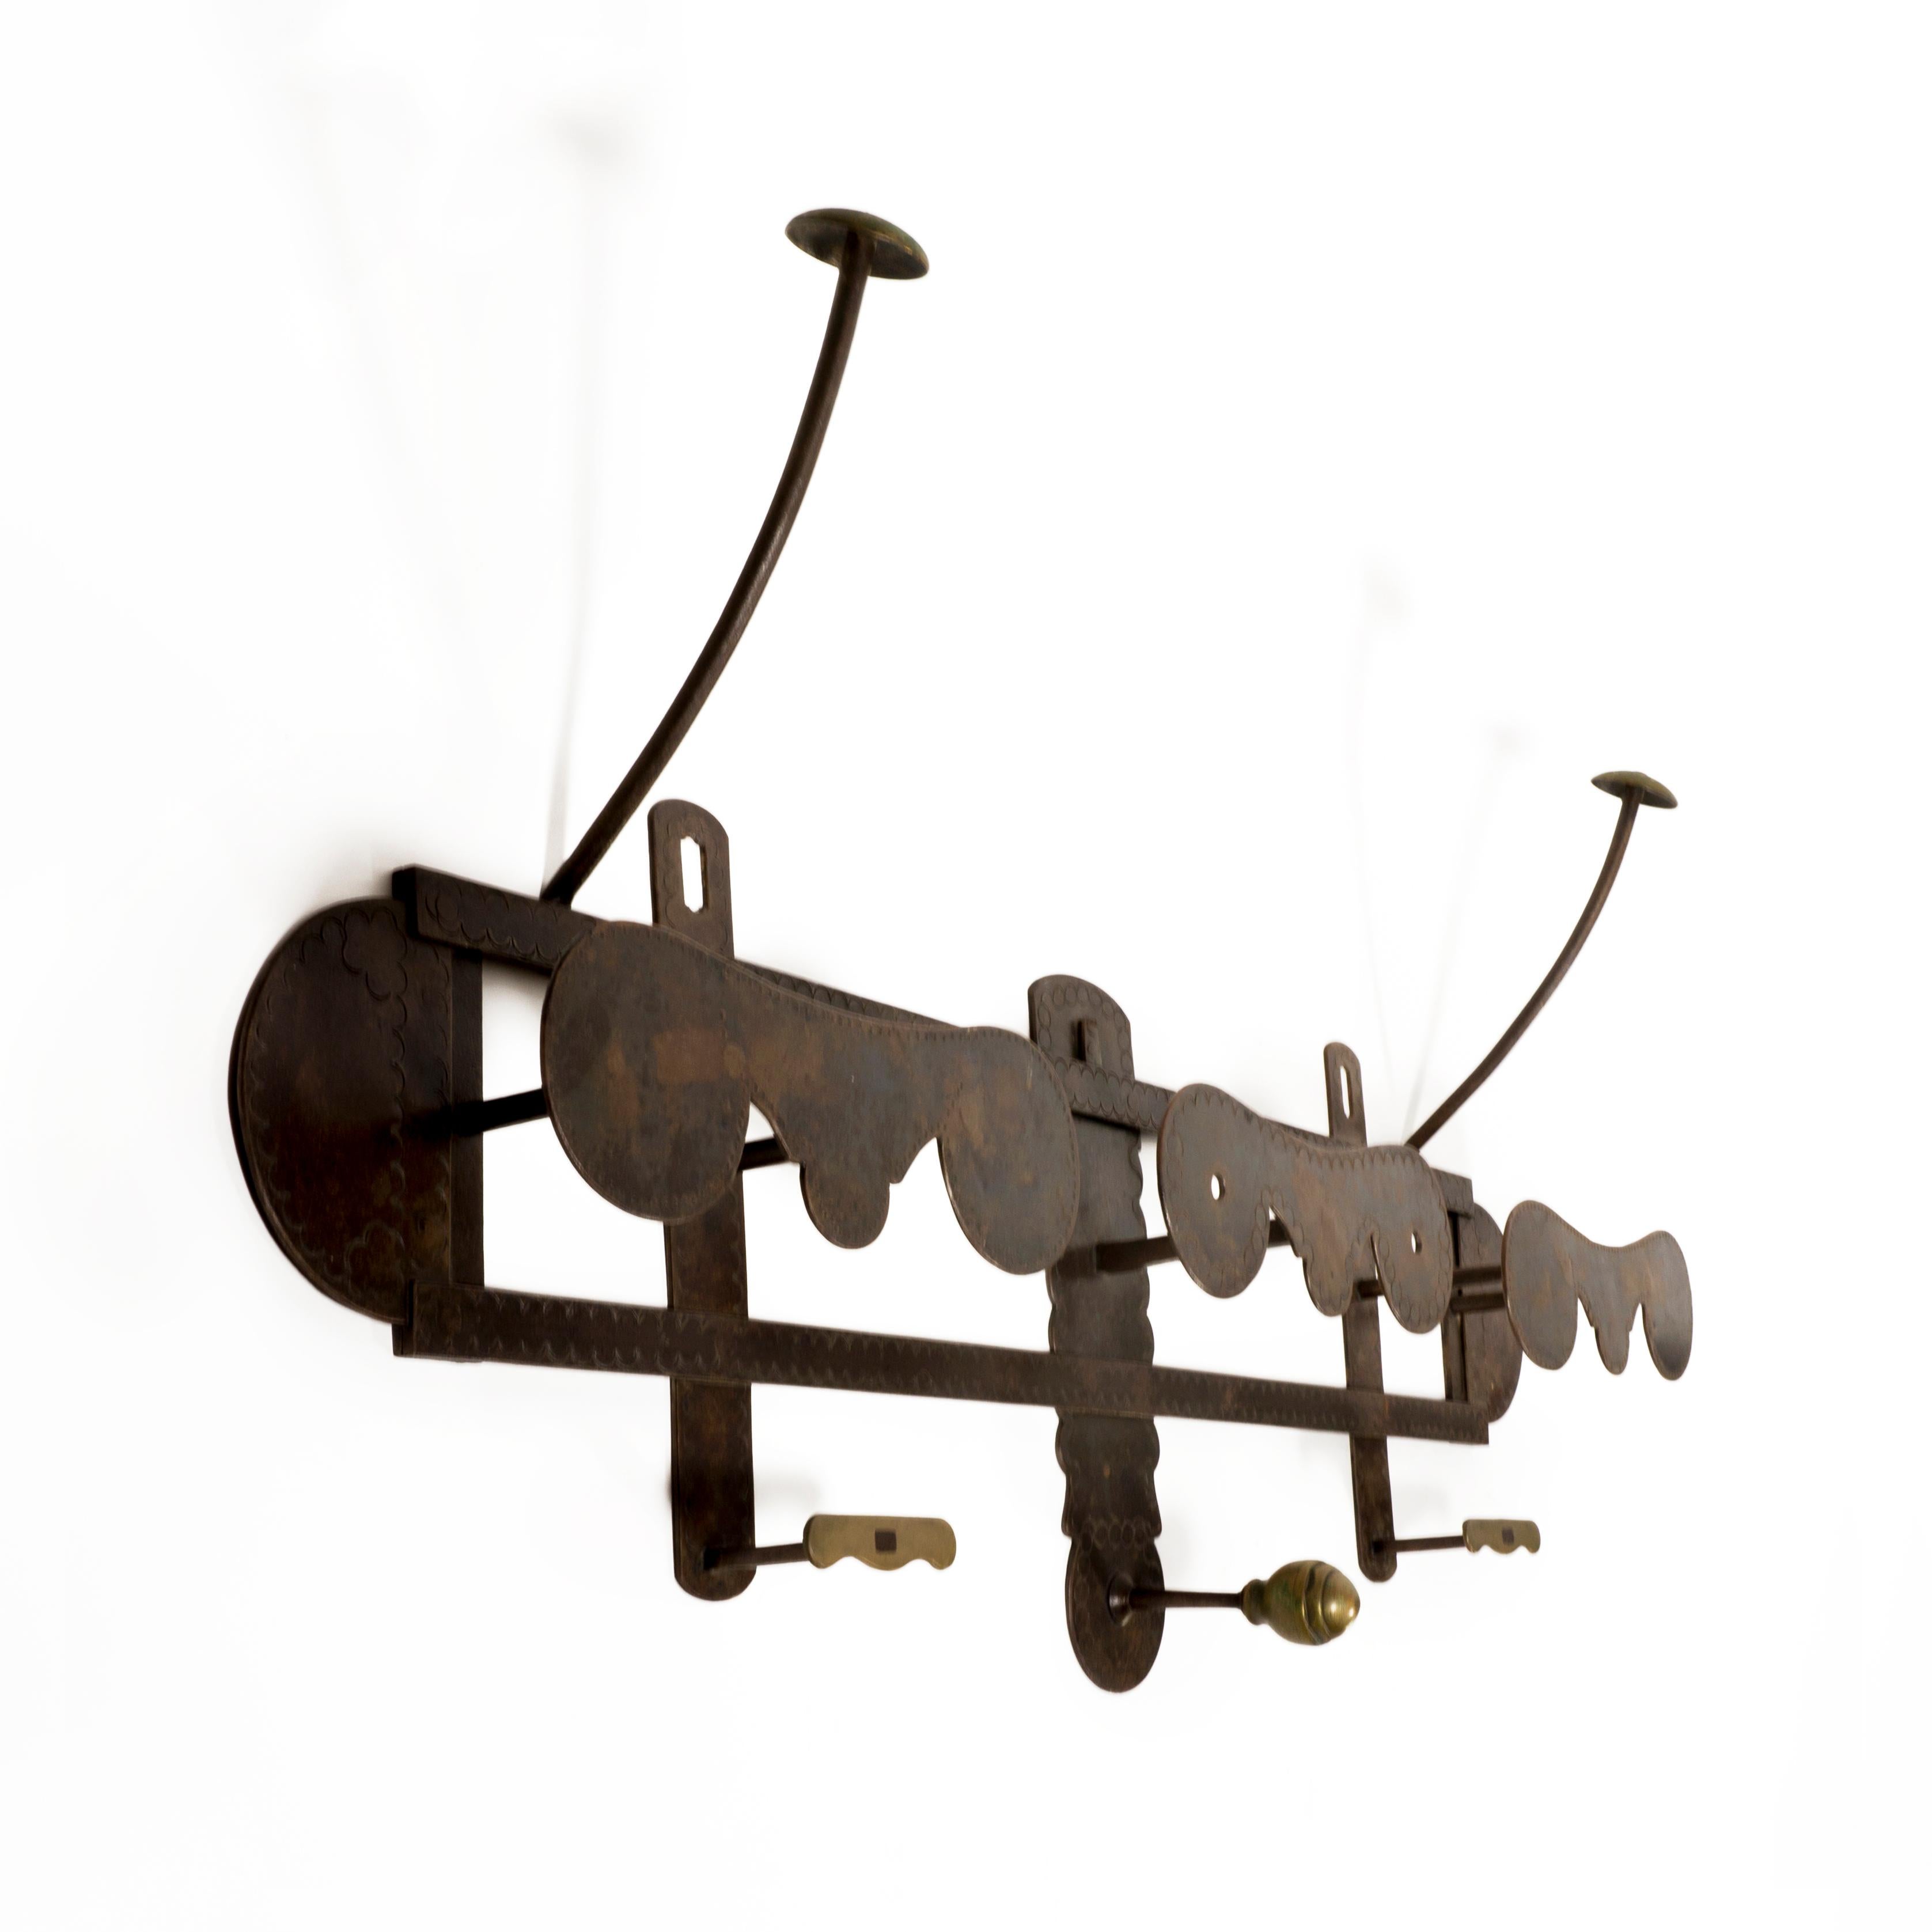 Large and very sturdy italian wrought iron wall mounted coat rack with brass accents.
The embossed wrought iron coat racj is finished with decorative brass details. There are two charming mushroom-shaped hooks for hats, three hooks for hanging